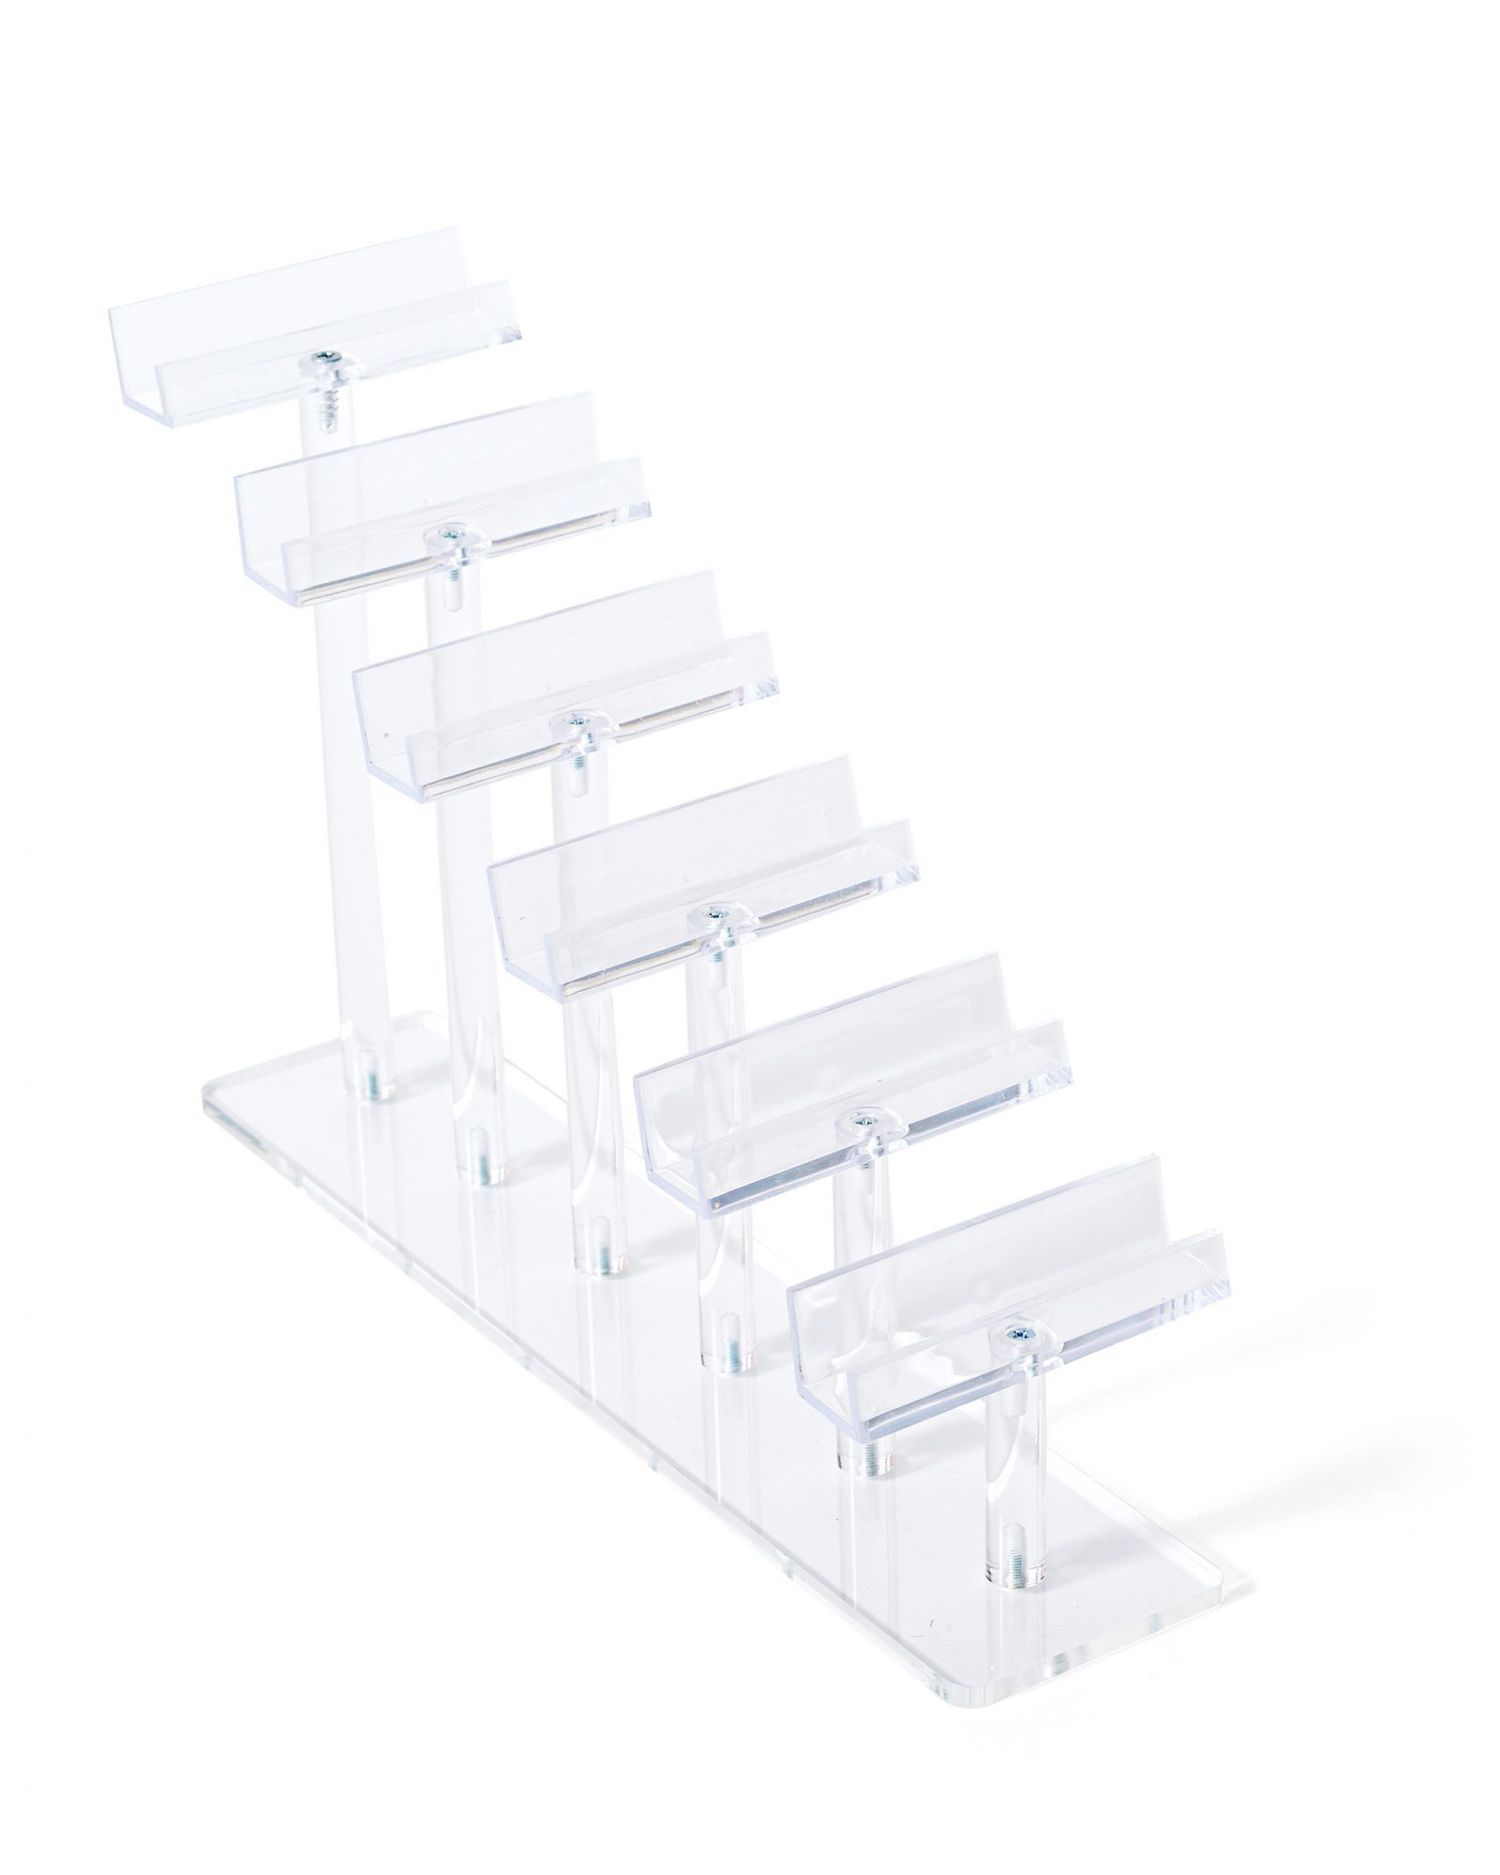 stacked-stairs-lucite-display-stand-350-d112790.jpg